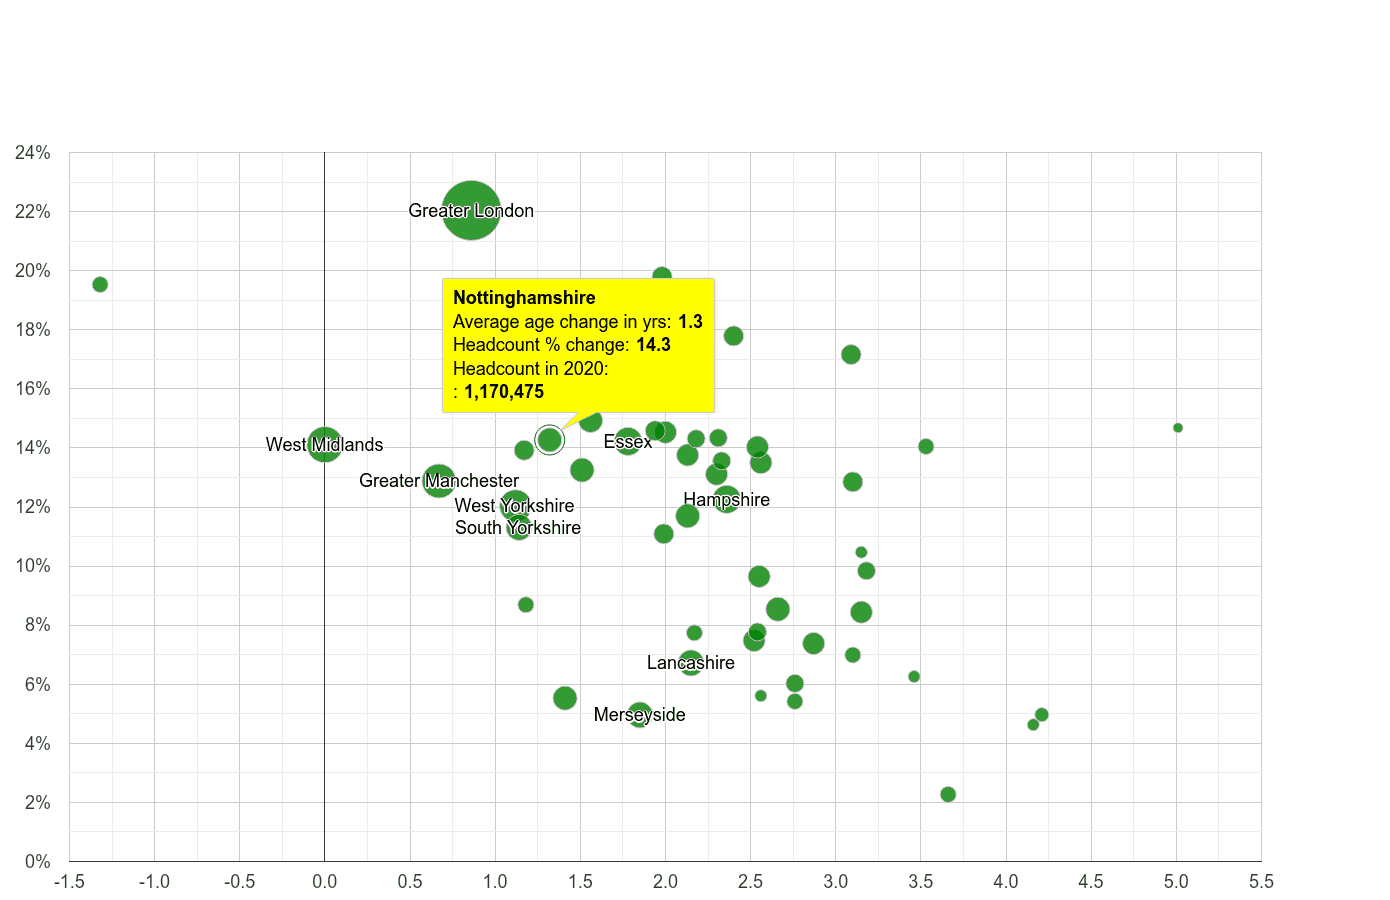 Nottinghamshire population changes compared to other counties relative to other counties